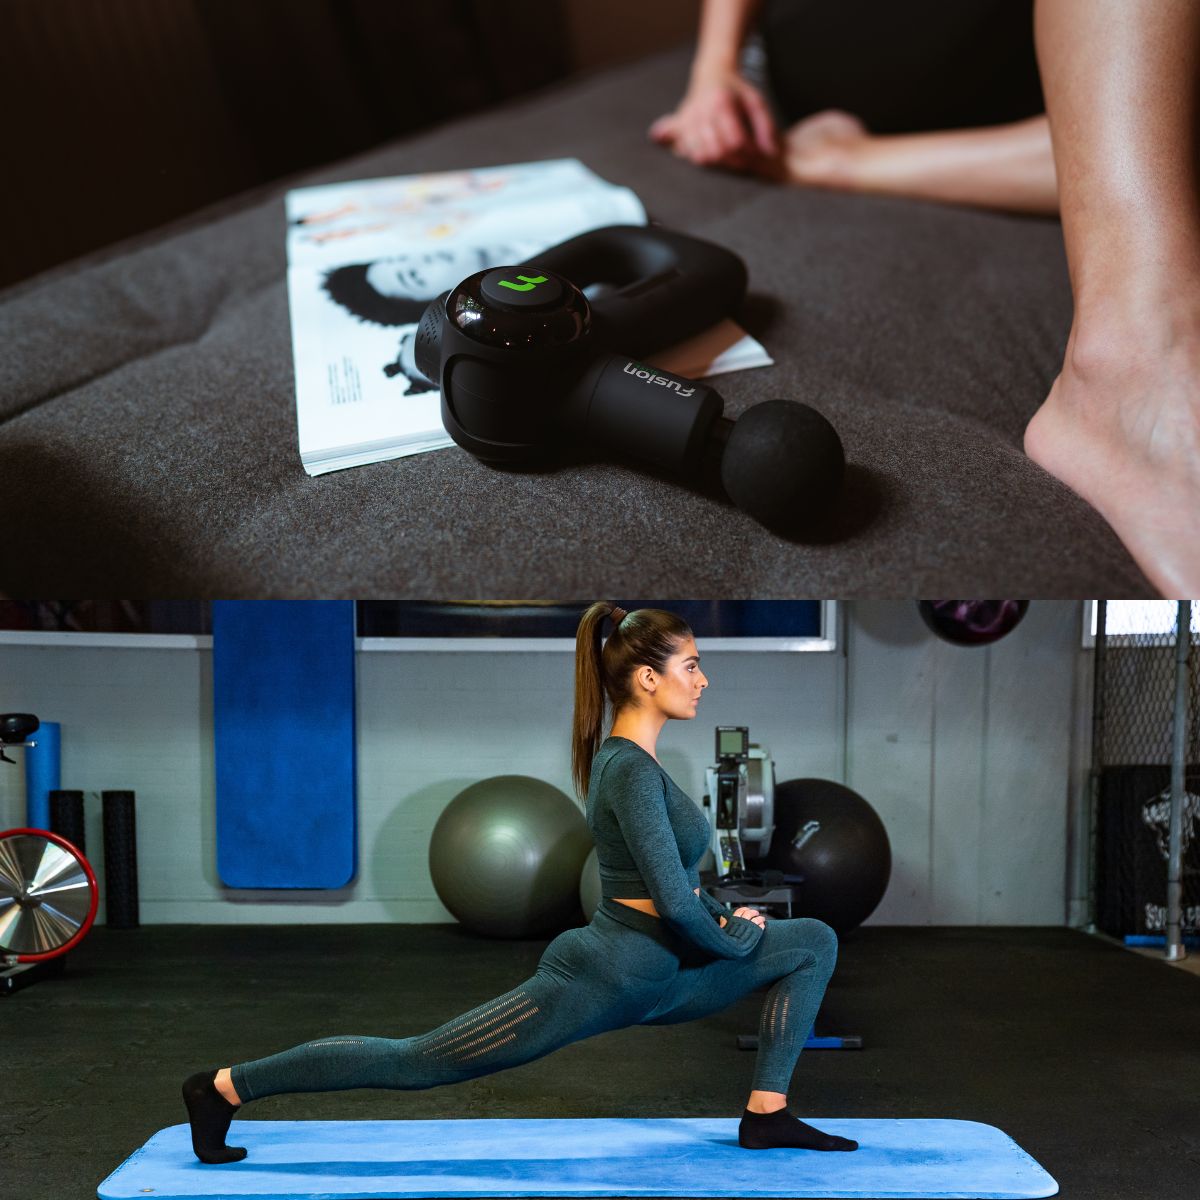 Using a Massage Gun vs. Stretching: Which One Is Best for Muscle Recovery?